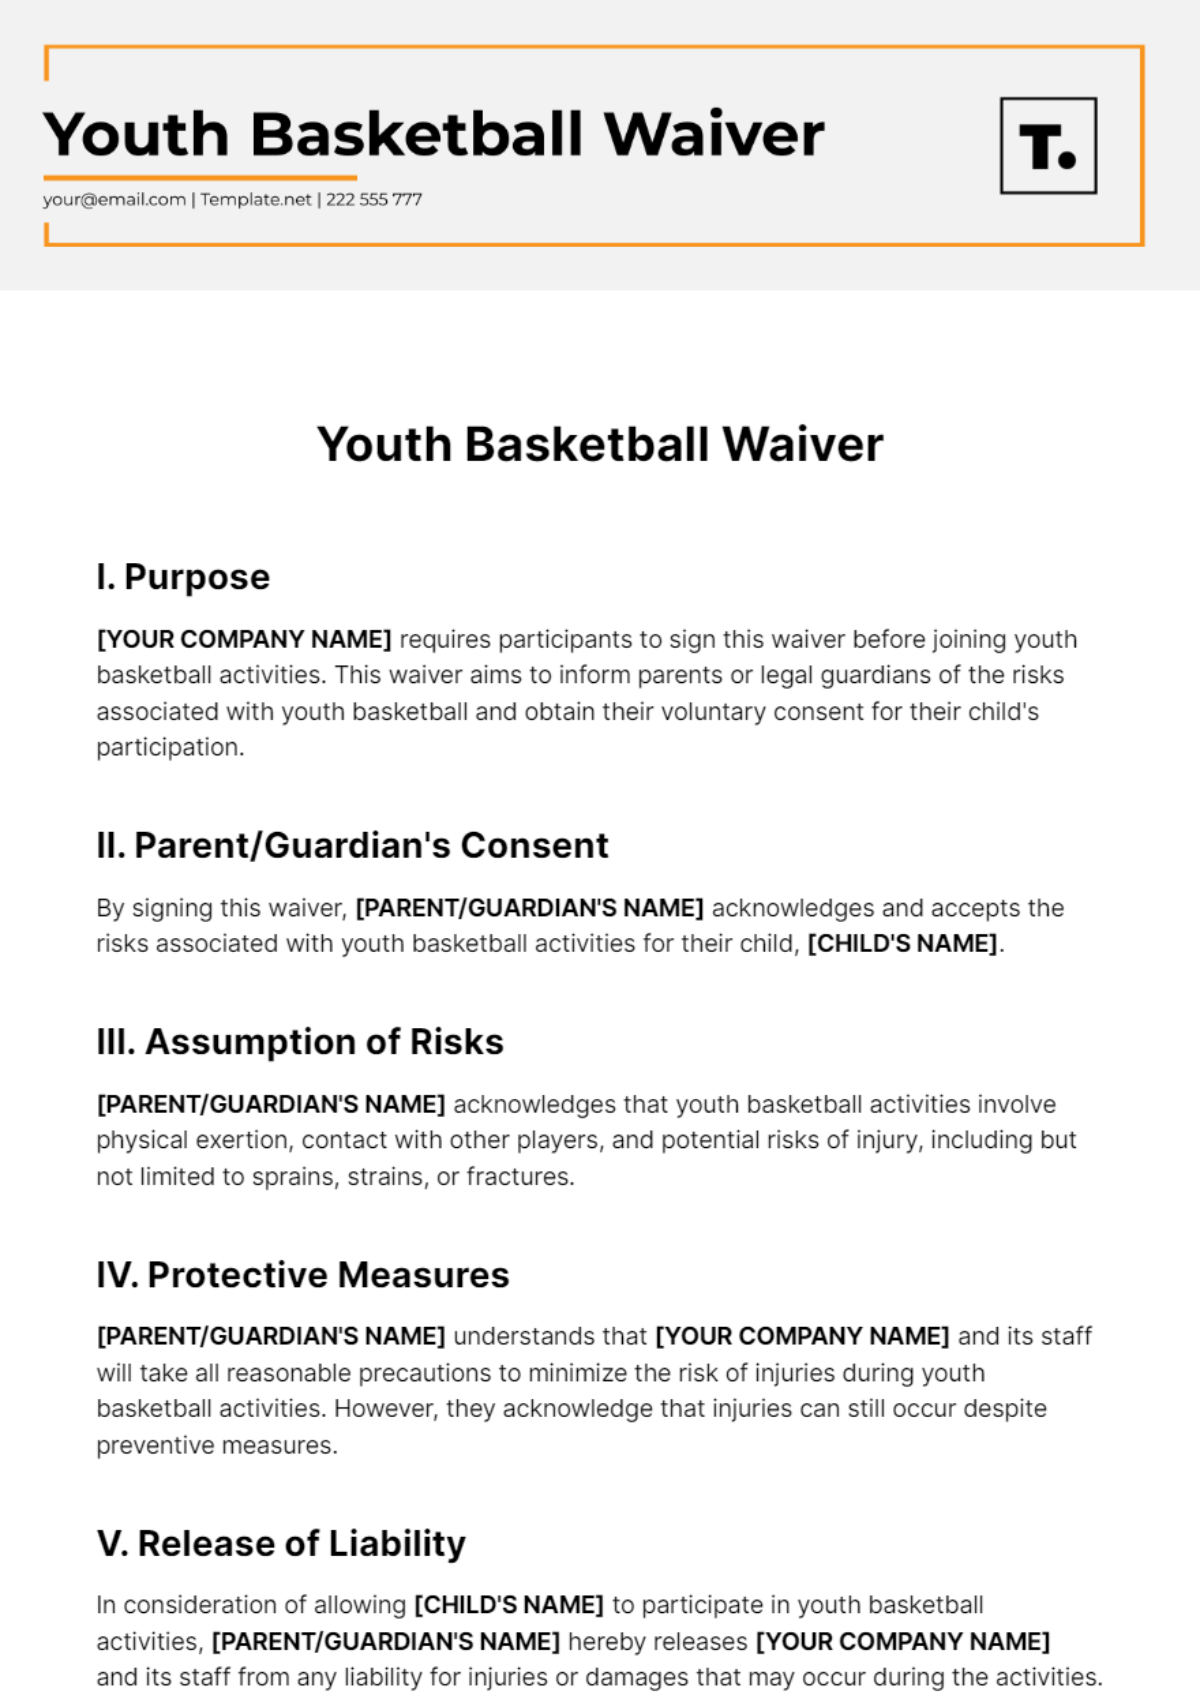 Free Youth Basketball Waiver Template